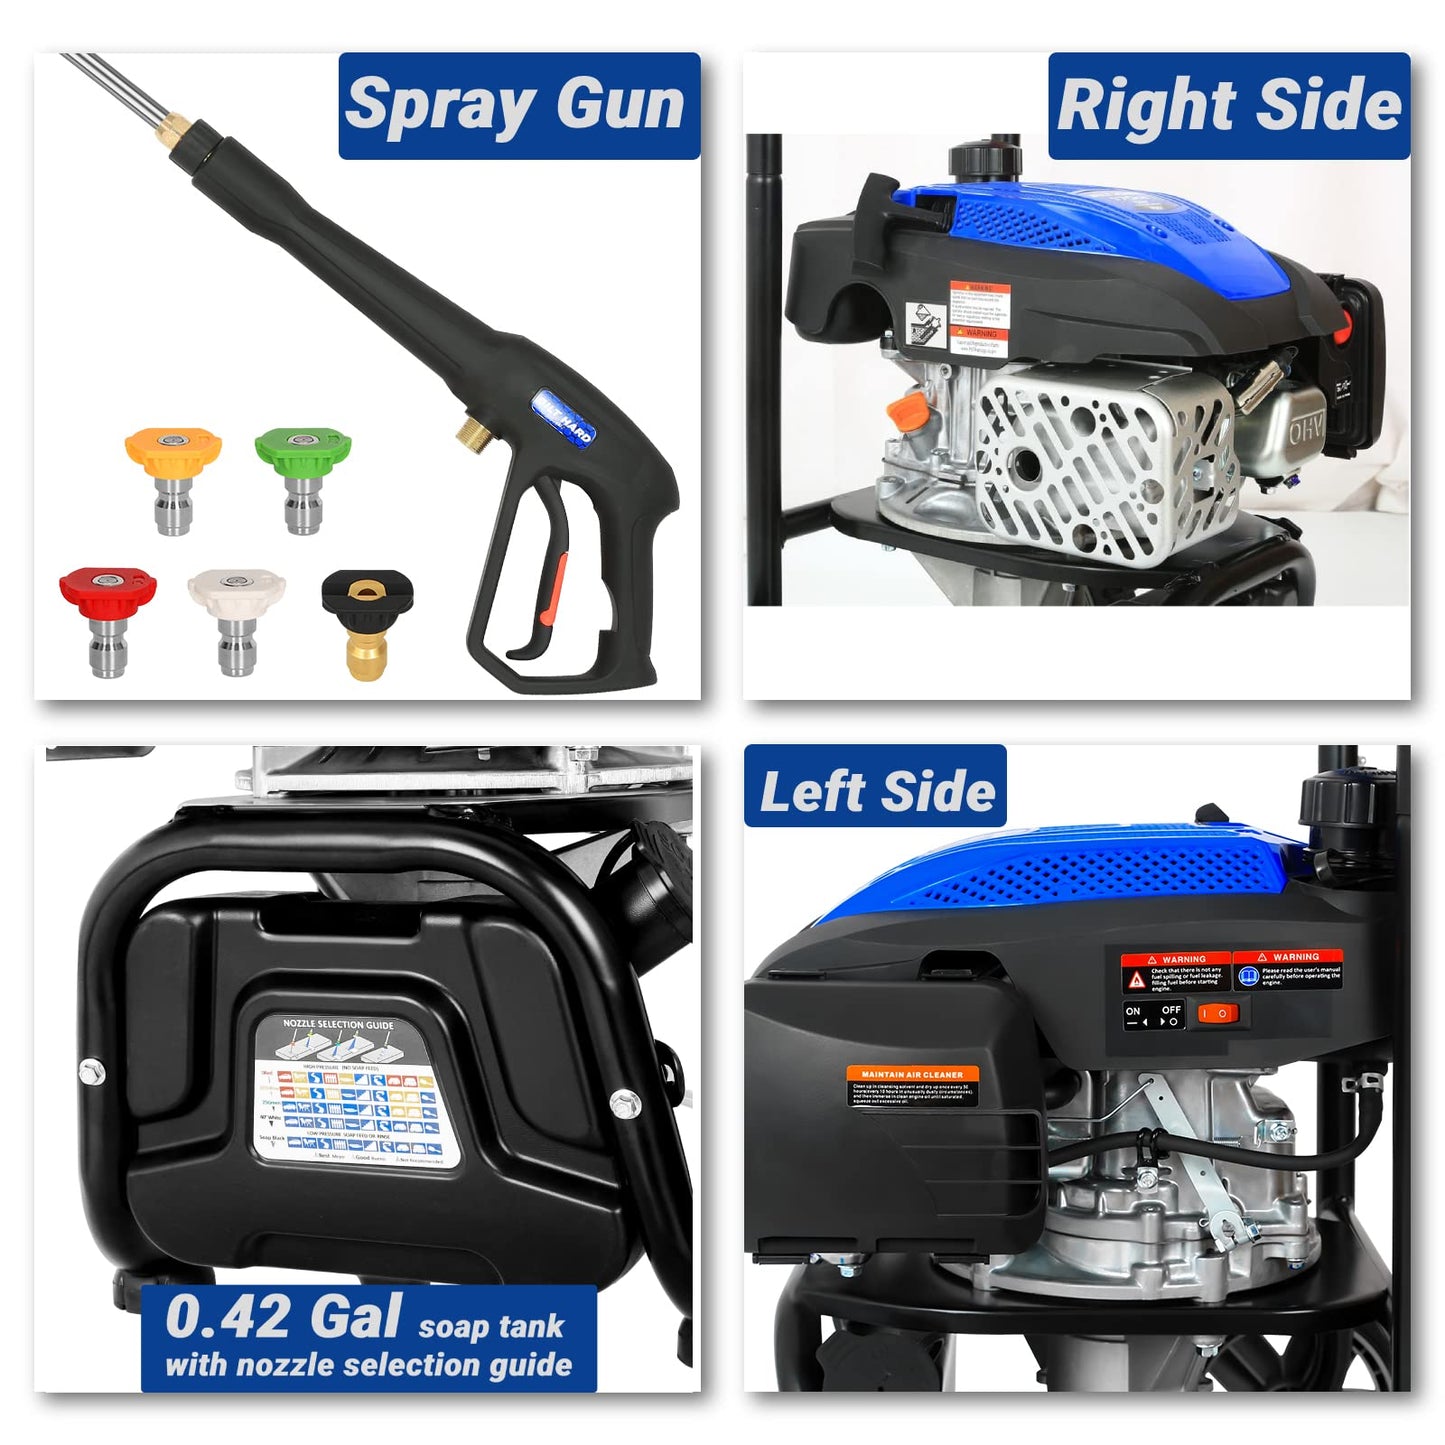 BILT HARD Gas Pressure Washer 3100 PSI 2.4 GPM, 5 Nozzle Tips 25ft Hose Power Washer with Soap Tank,High Pressure Washers Gas Powered, EPA & CARB Certified